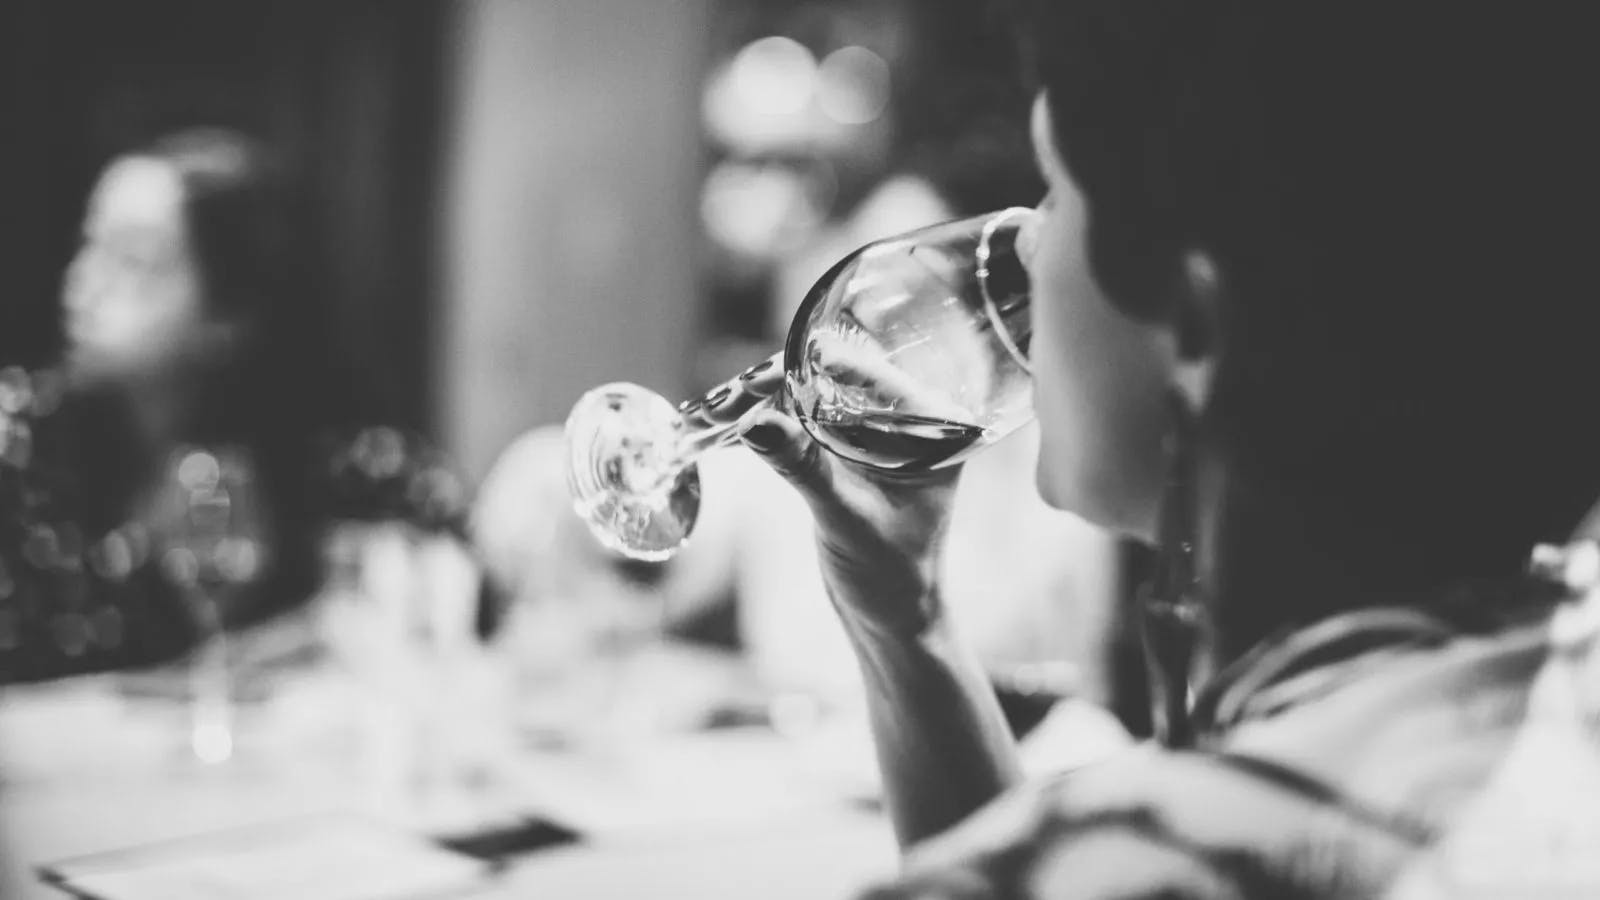 A person tasting wine, tastefully in black and white